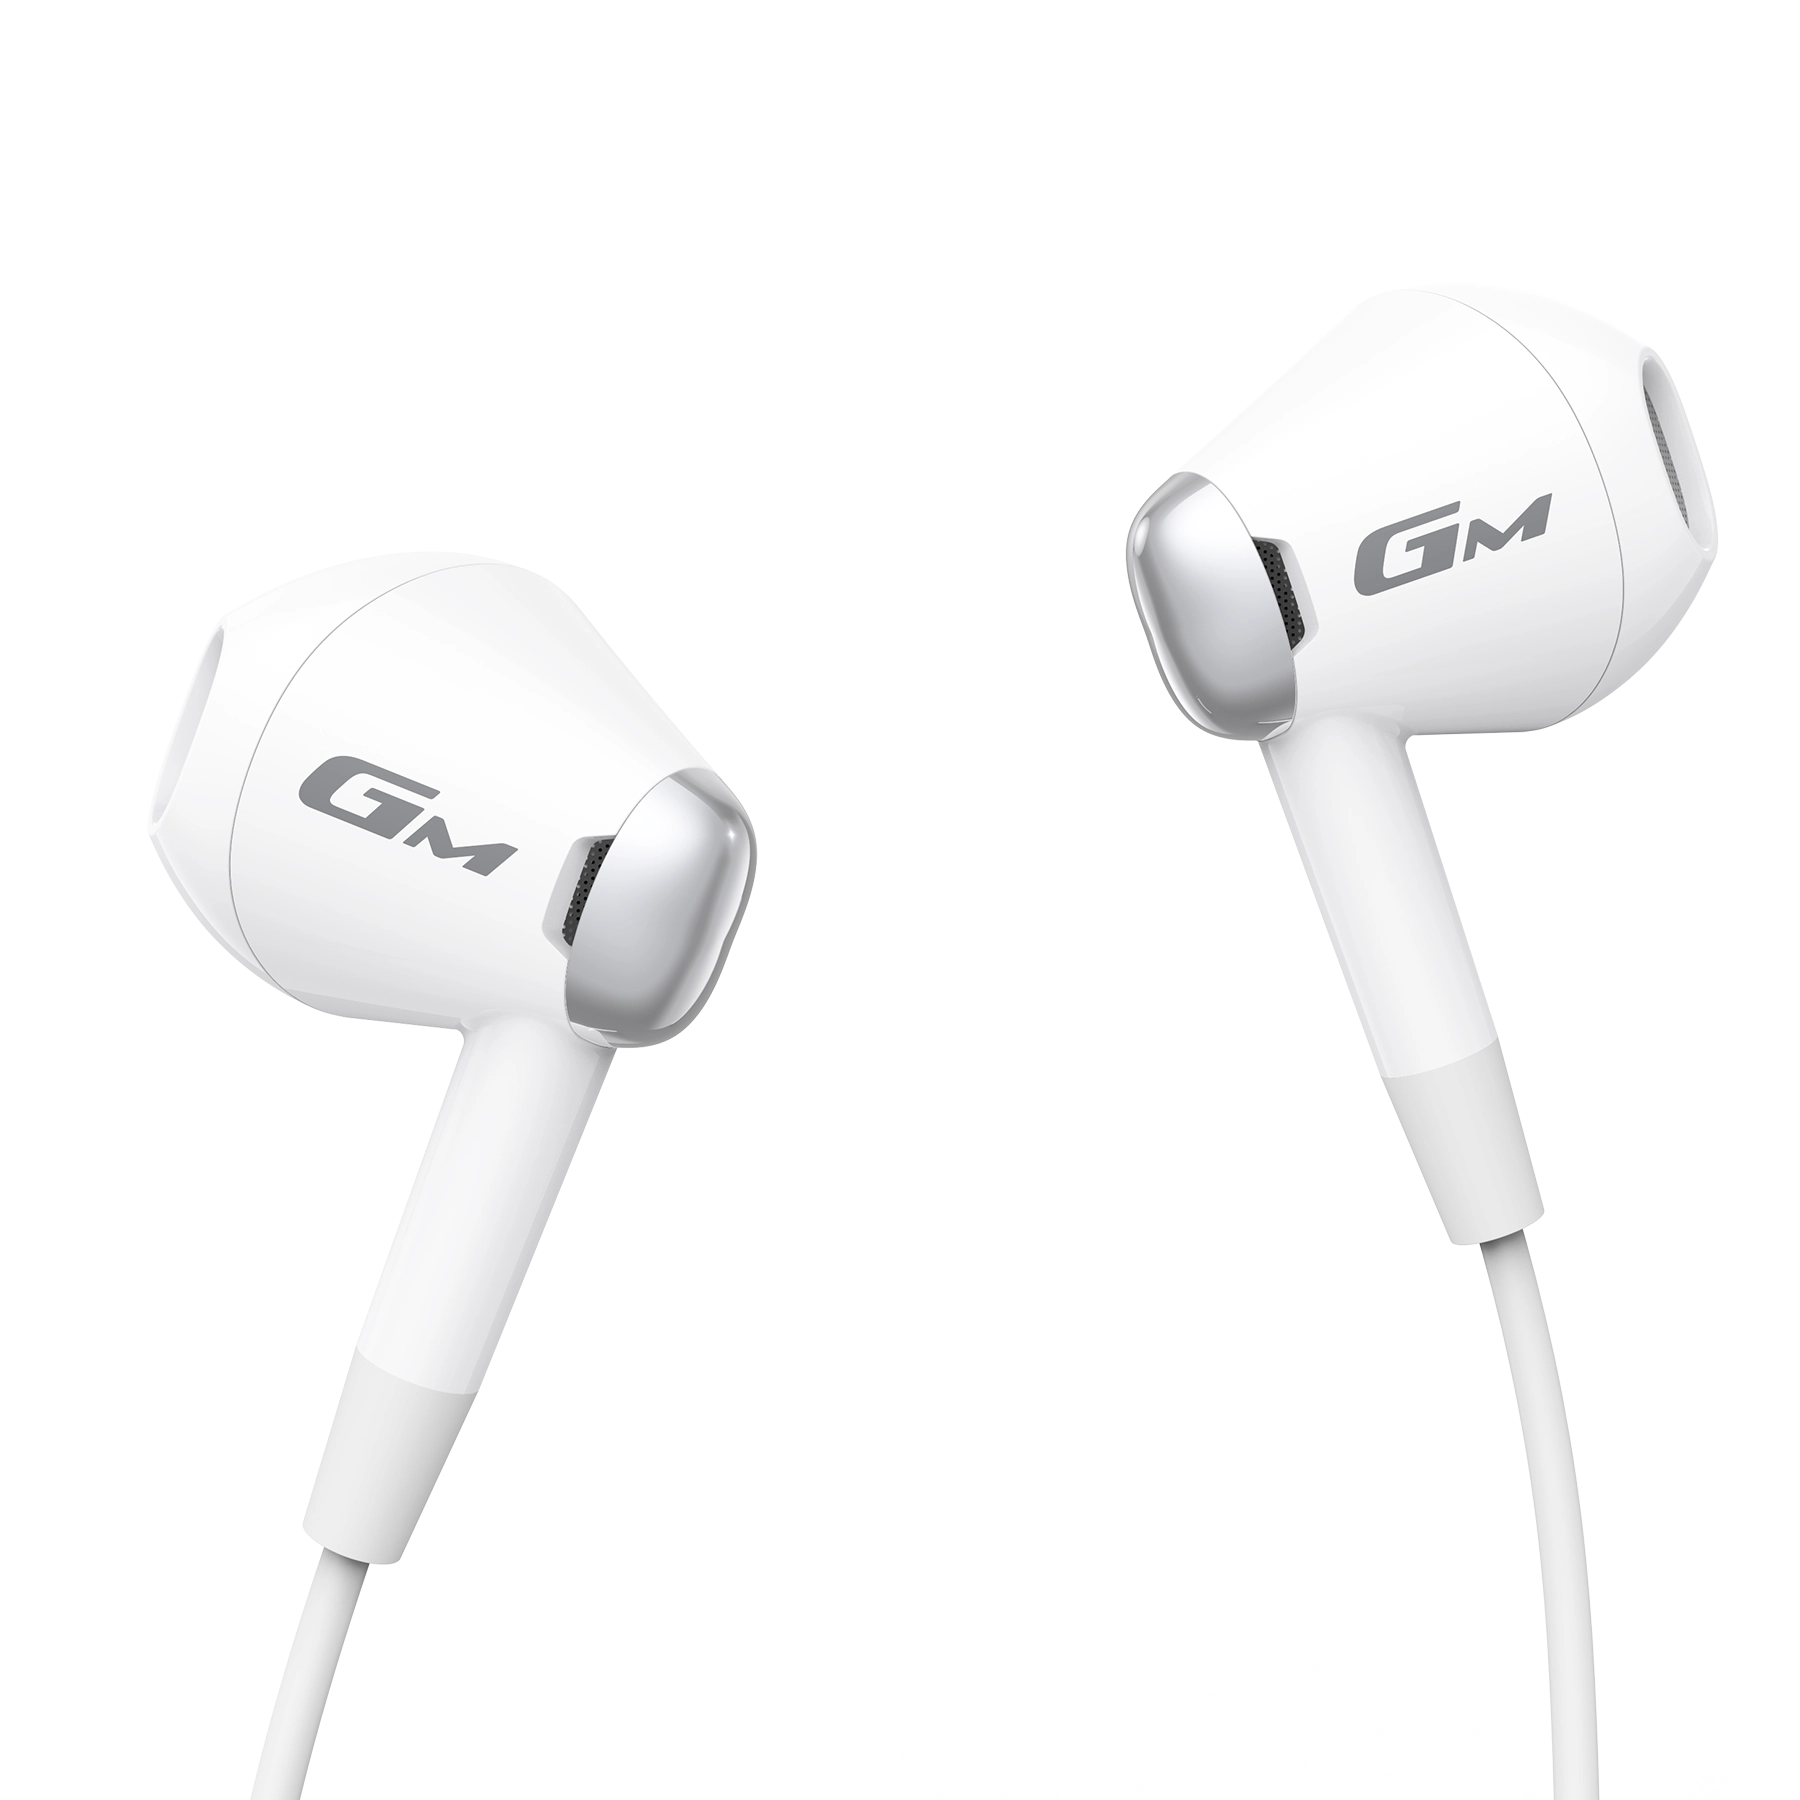 GM180 PLUS Earbuds Product Pictures white_4